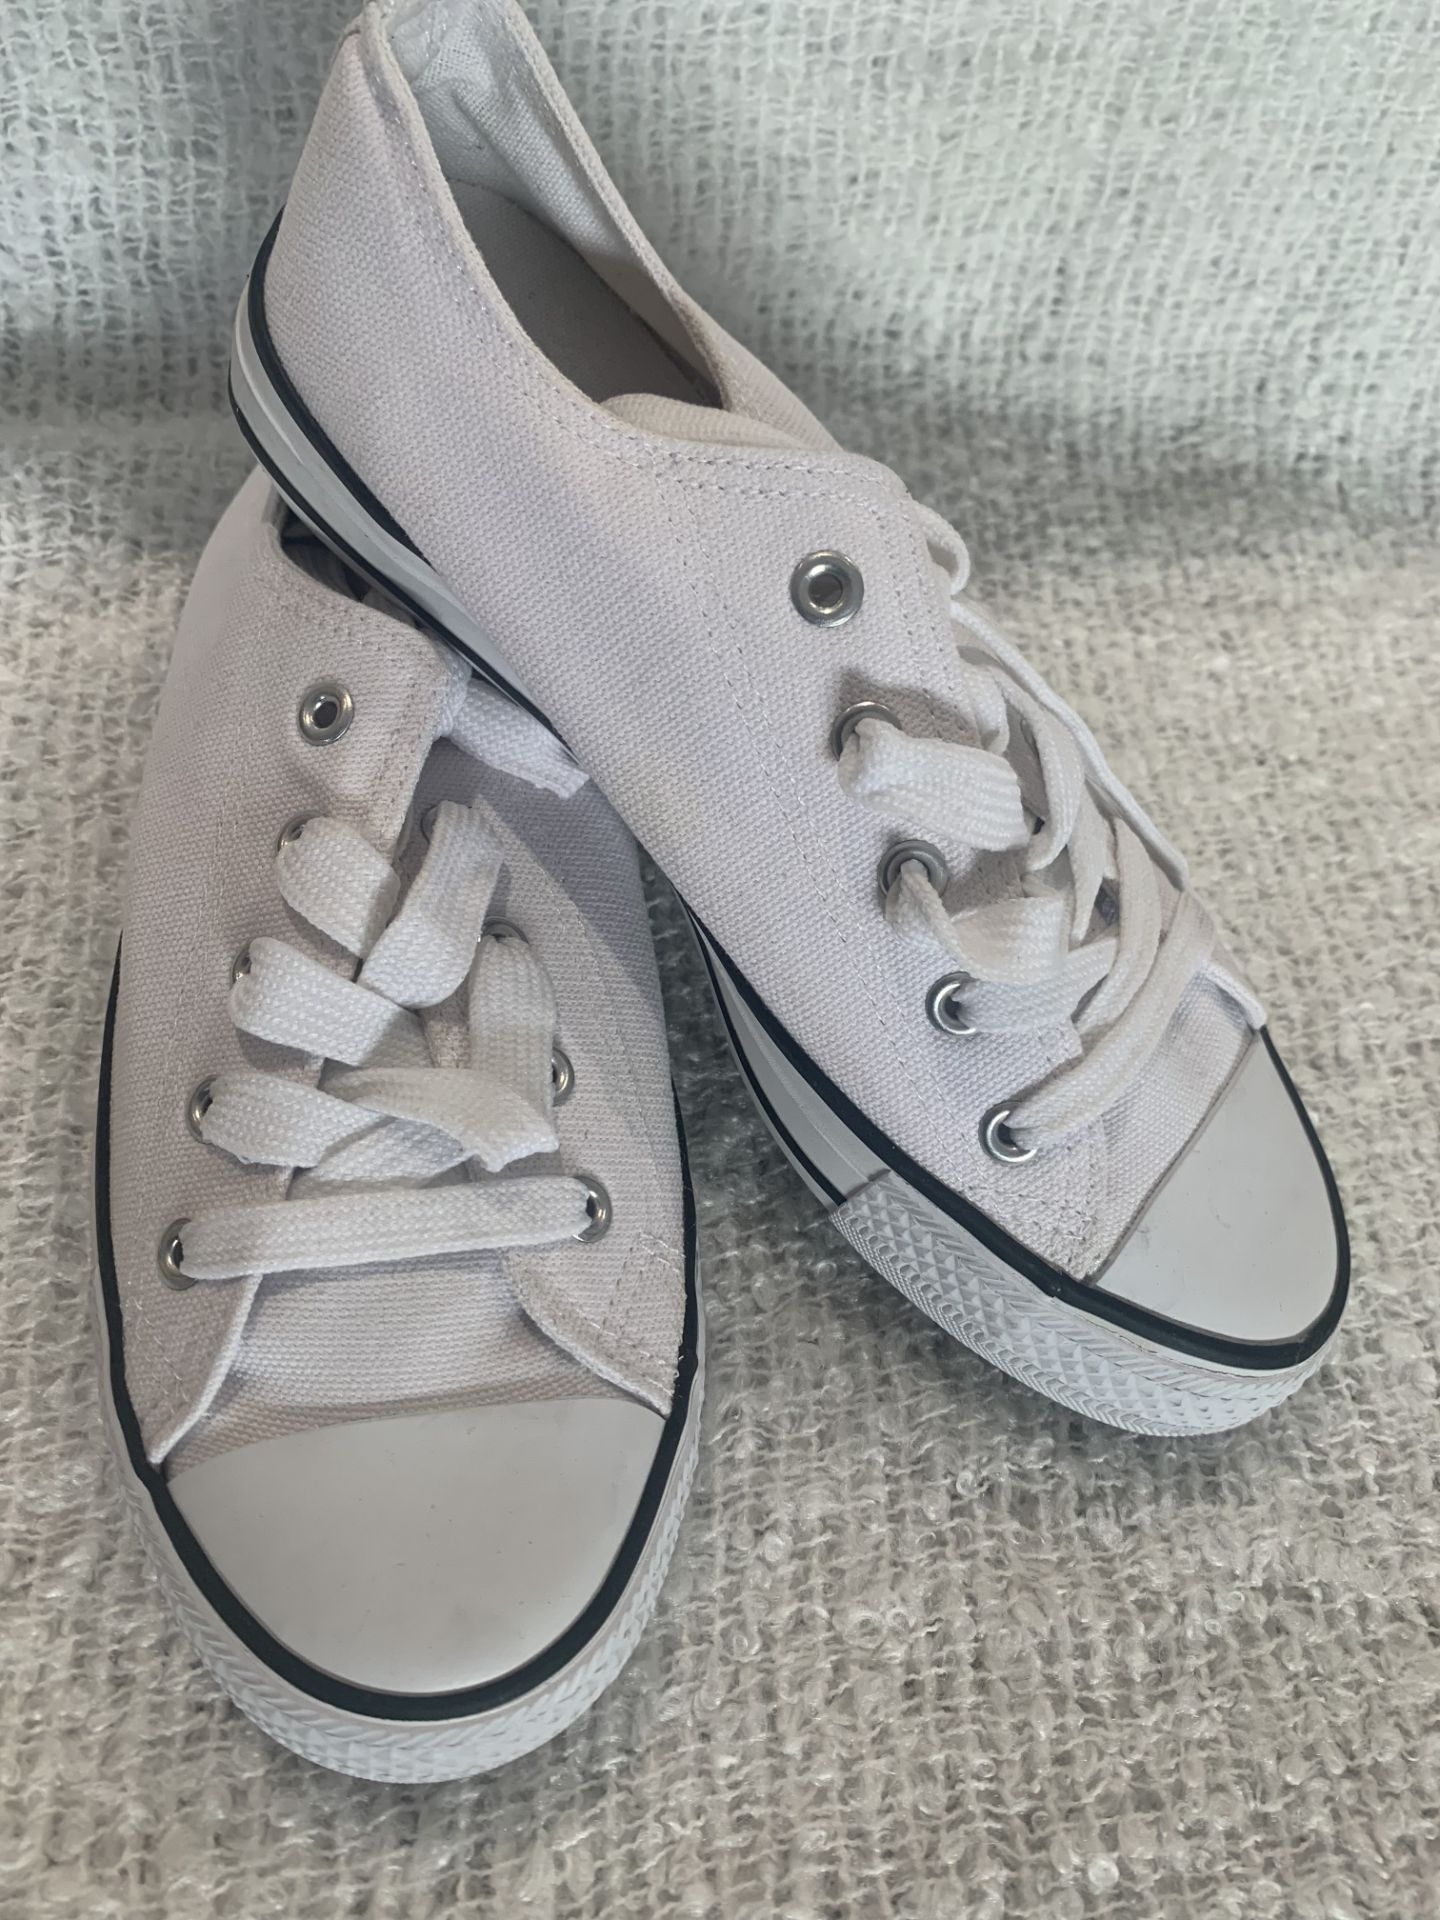 Brand New Mojo White Canvas Trainers, UK Women's 5 - Image 3 of 5